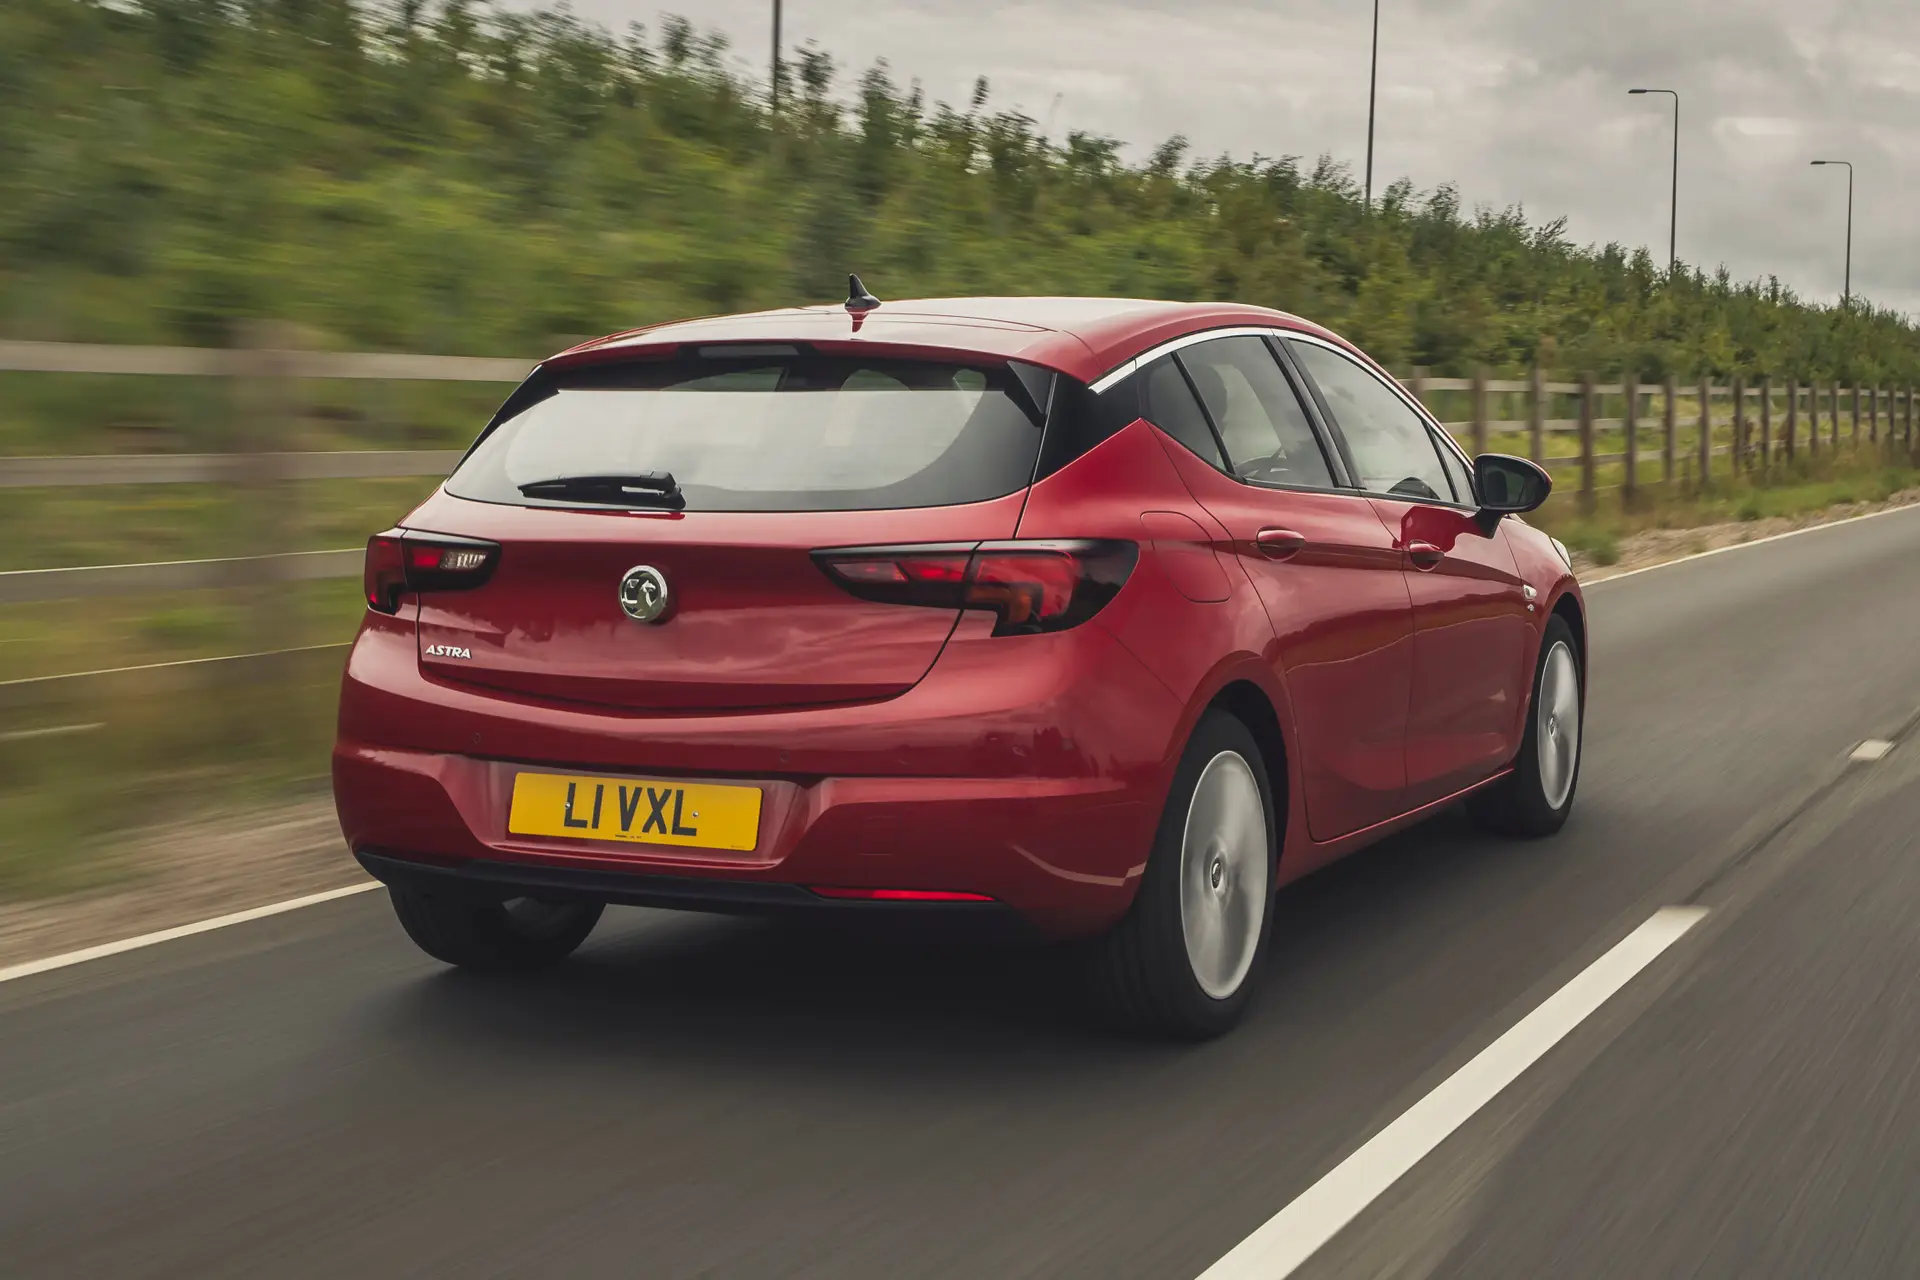 Used Vauxhall Astra (2015 - 2023) Review: Rear Side View